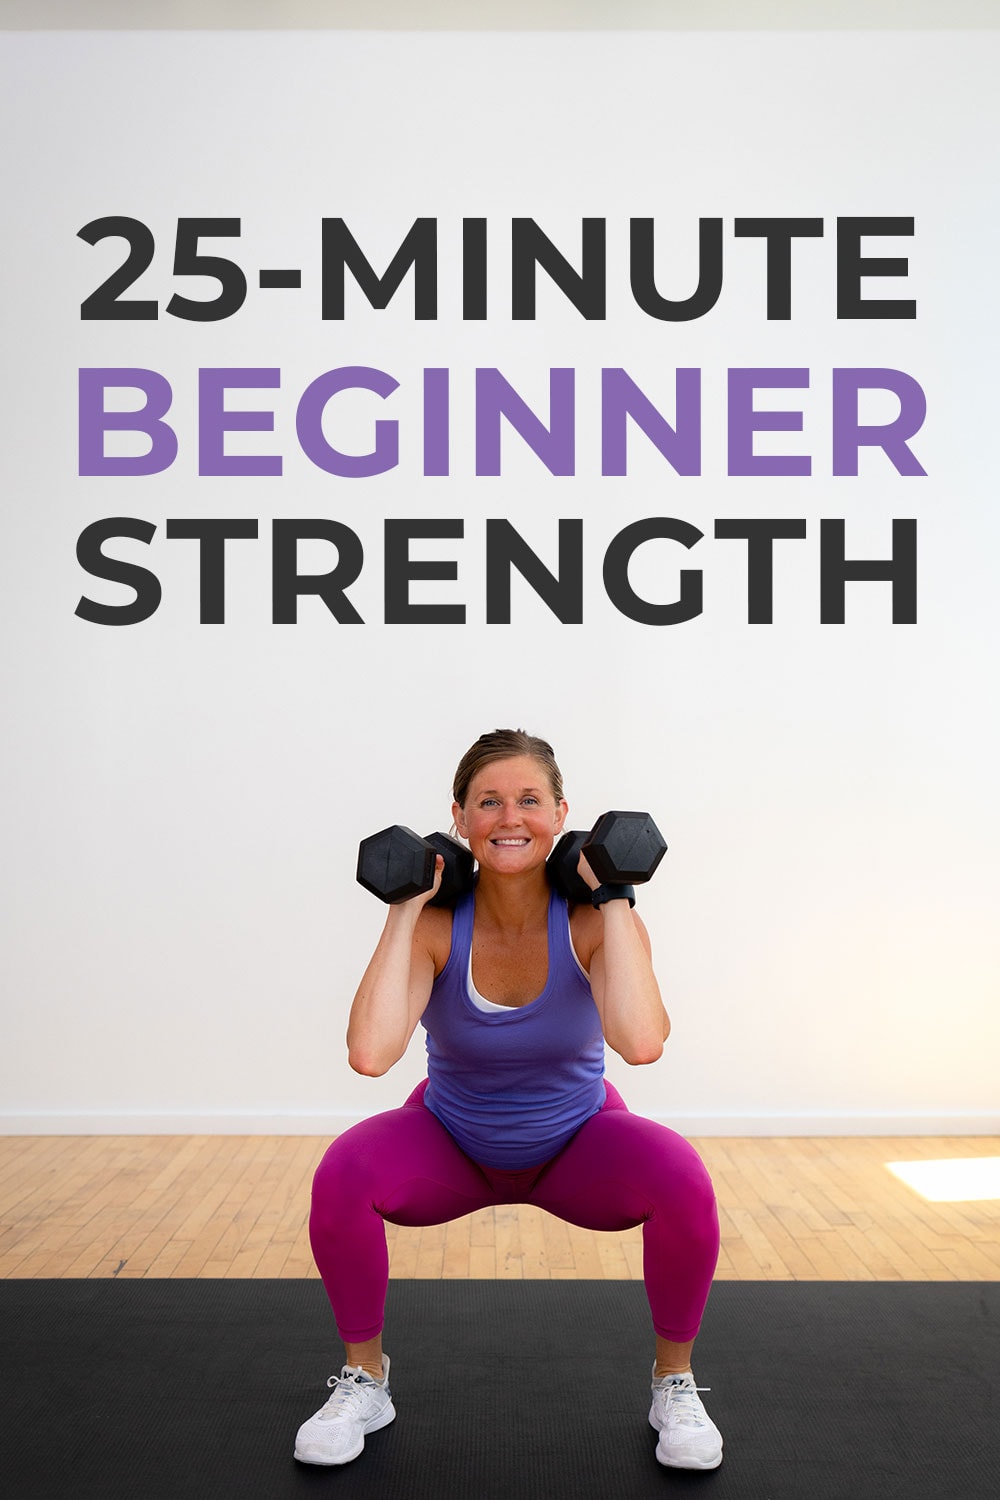 25-Minute Dumbbell Workout for Beginners | Nourish Move Love